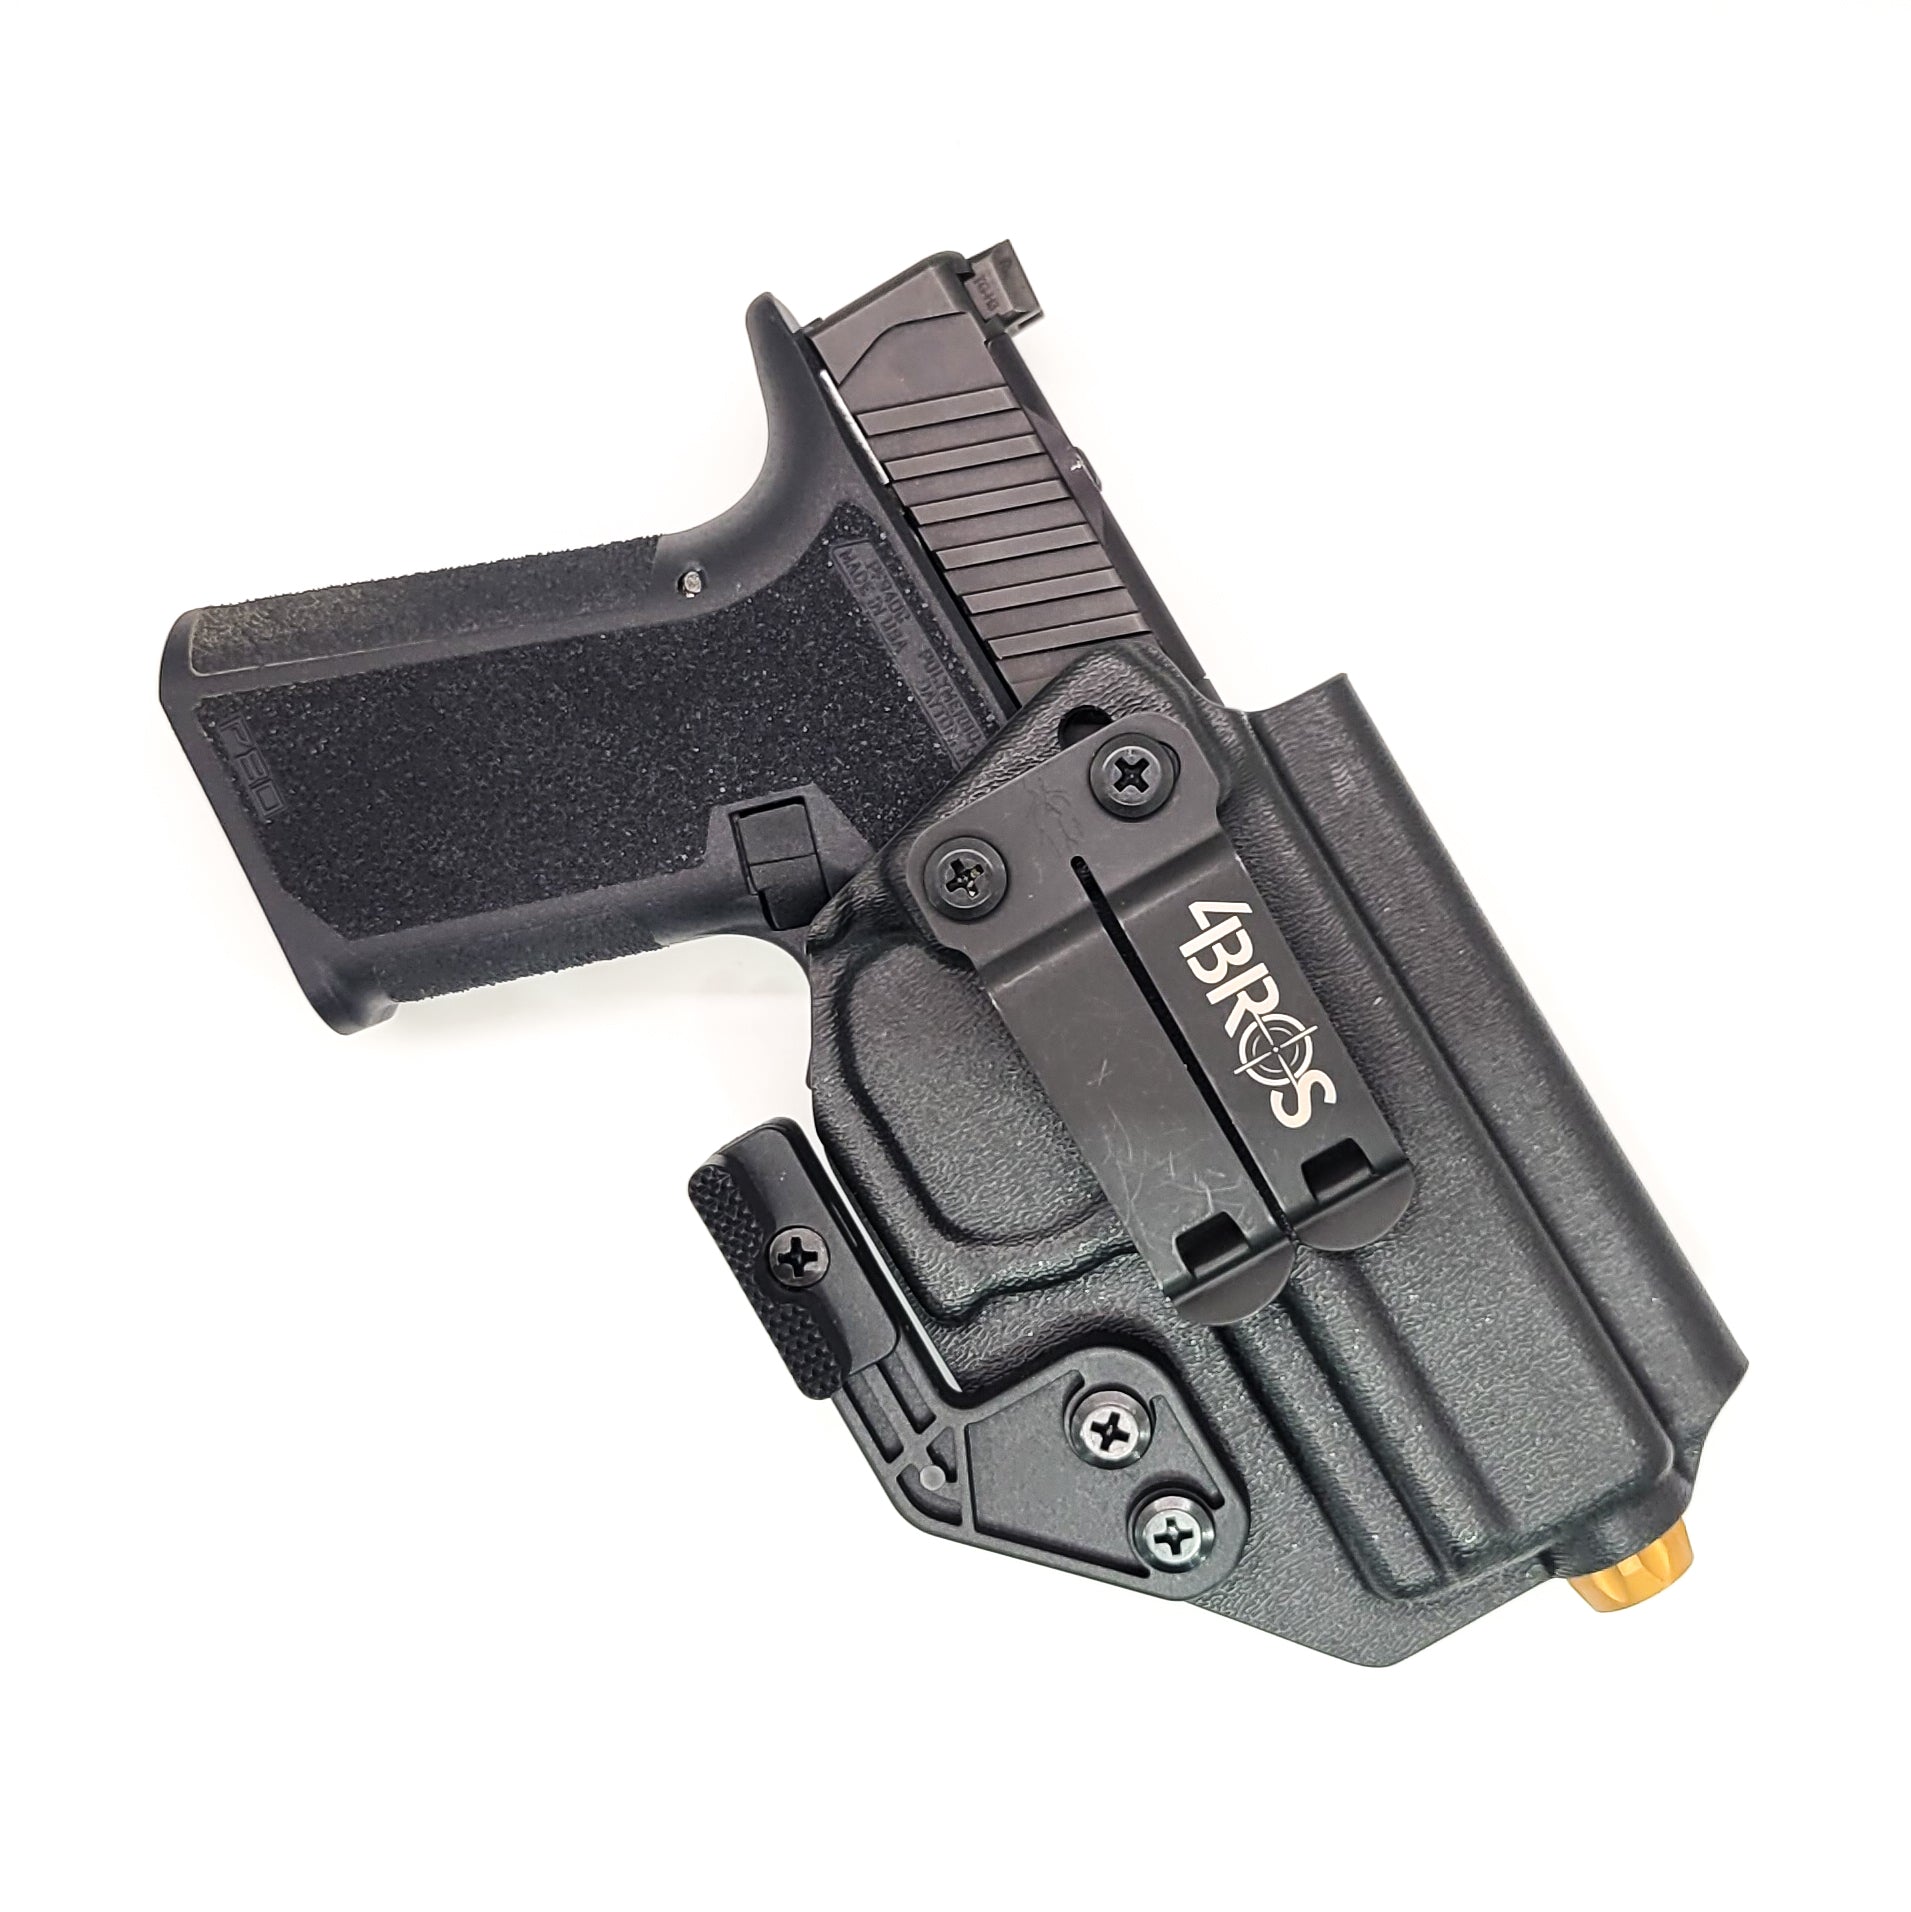 For the best, Inside Waistband IWB AIWB Appendix Kydex Holster designed to fit the Polymer80 PF940C pistol, shop Four Brothers 4BROS Holsters.  Adjustable retention, high sweat guard, formed accommodates threaded barrels and most red dot sights. Made in the USA 